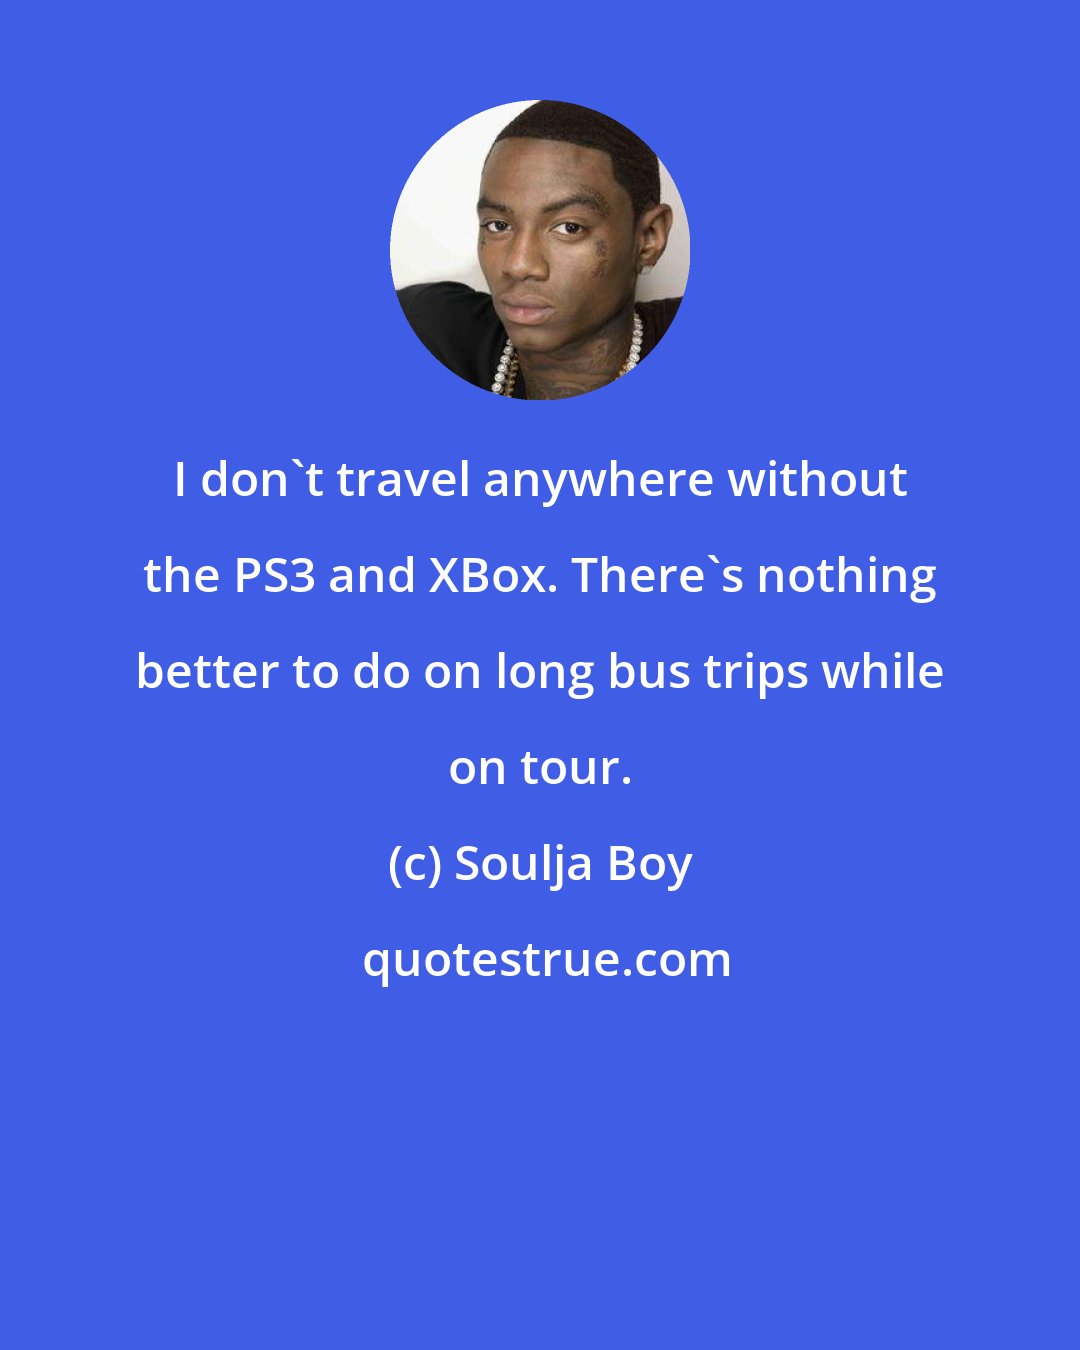 Soulja Boy: I don't travel anywhere without the PS3 and XBox. There's nothing better to do on long bus trips while on tour.